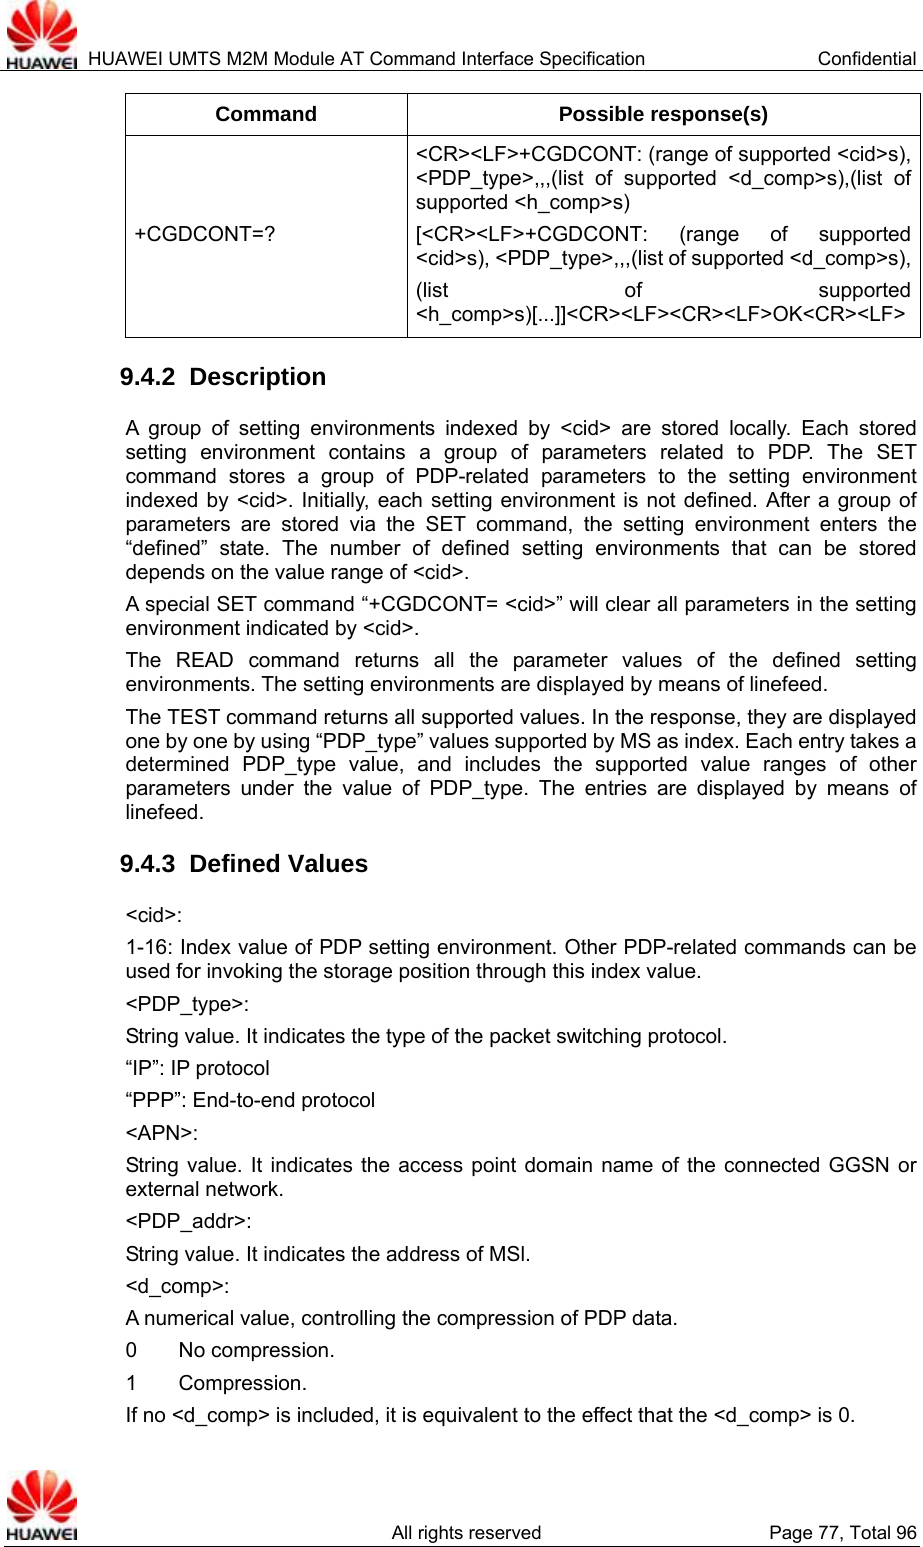  HUAWEI UMTS M2M Module AT Command Interface Specification  Confidential   All rights reserved  Page 77, Total 96 Command Possible response(s) +CGDCONT=? &lt;CR&gt;&lt;LF&gt;+CGDCONT: (range of supported &lt;cid&gt;s), &lt;PDP_type&gt;,,,(list of supported &lt;d_comp&gt;s),(list of supported &lt;h_comp&gt;s) [&lt;CR&gt;&lt;LF&gt;+CGDCONT: (range of supported &lt;cid&gt;s), &lt;PDP_type&gt;,,,(list of supported &lt;d_comp&gt;s),(list of supported &lt;h_comp&gt;s)[...]]&lt;CR&gt;&lt;LF&gt;&lt;CR&gt;&lt;LF&gt;OK&lt;CR&gt;&lt;LF&gt;9.4.2  Description A group of setting environments indexed by &lt;cid&gt; are stored locally. Each stored setting environment contains a group of parameters related to PDP. The SET command stores a group of PDP-related parameters to the setting environment indexed by &lt;cid&gt;. Initially, each setting environment is not defined. After a group of parameters are stored via the SET command, the setting environment enters the “defined” state. The number of defined setting environments that can be stored depends on the value range of &lt;cid&gt;.   A special SET command “+CGDCONT= &lt;cid&gt;” will clear all parameters in the setting environment indicated by &lt;cid&gt;.   The READ command returns all the parameter values of the defined setting environments. The setting environments are displayed by means of linefeed.   The TEST command returns all supported values. In the response, they are displayed one by one by using “PDP_type” values supported by MS as index. Each entry takes a determined PDP_type value, and includes the supported value ranges of other parameters under the value of PDP_type. The entries are displayed by means of linefeed.  9.4.3  Defined Values &lt;cid&gt;:  1-16: Index value of PDP setting environment. Other PDP-related commands can be used for invoking the storage position through this index value.   &lt;PDP_type&gt;:  String value. It indicates the type of the packet switching protocol.   “IP”: IP protocol “PPP”: End-to-end protocol &lt;APN&gt;:  String value. It indicates the access point domain name of the connected GGSN or external network. &lt;PDP_addr&gt;:  String value. It indicates the address of MSl.   &lt;d_comp&gt;:  A numerical value, controlling the compression of PDP data.   0    No compression.  1    Compression.  If no &lt;d_comp&gt; is included, it is equivalent to the effect that the &lt;d_comp&gt; is 0.   